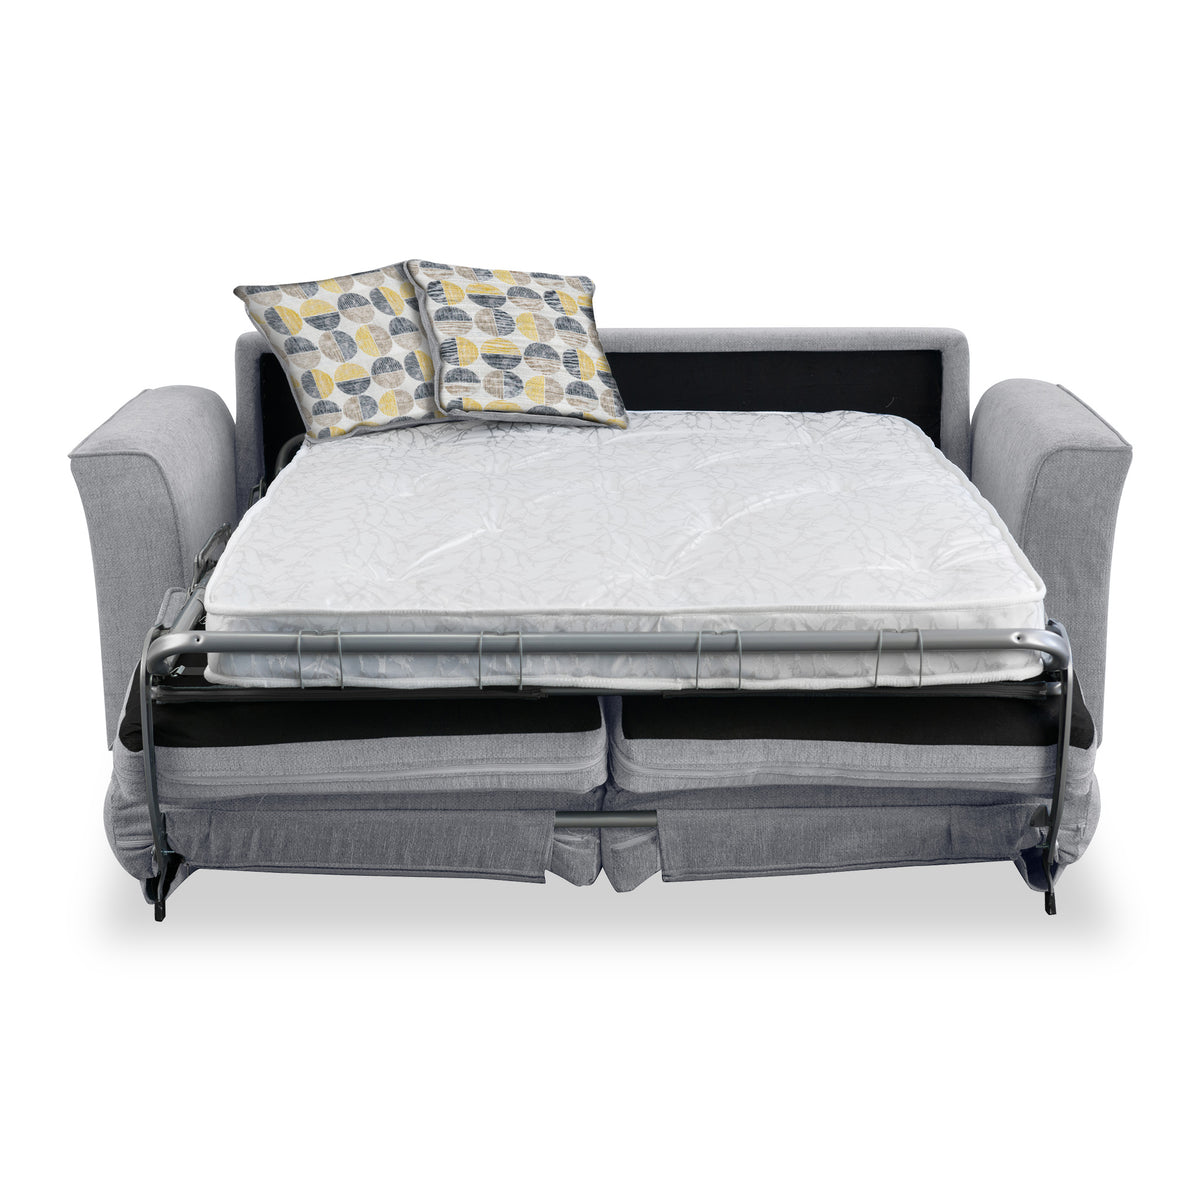 Abbott 2 Seater Sofabed in Silver with Rufus Beige Cushions by Roseland Furniture